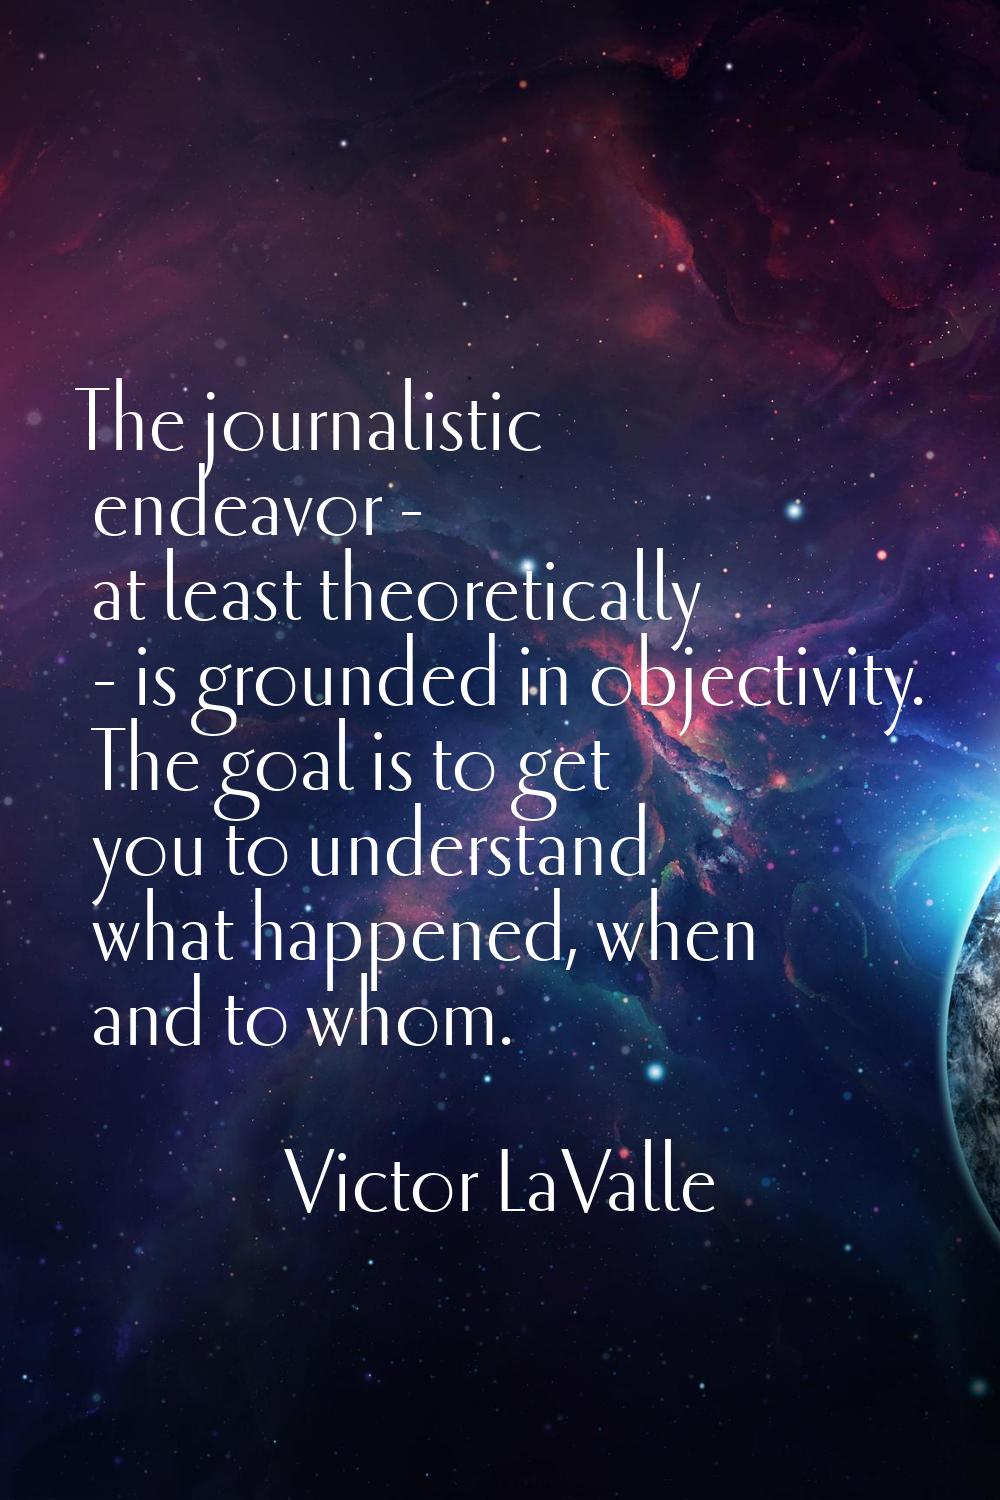 The journalistic endeavor - at least theoretically - is grounded in objectivity. The goal is to get